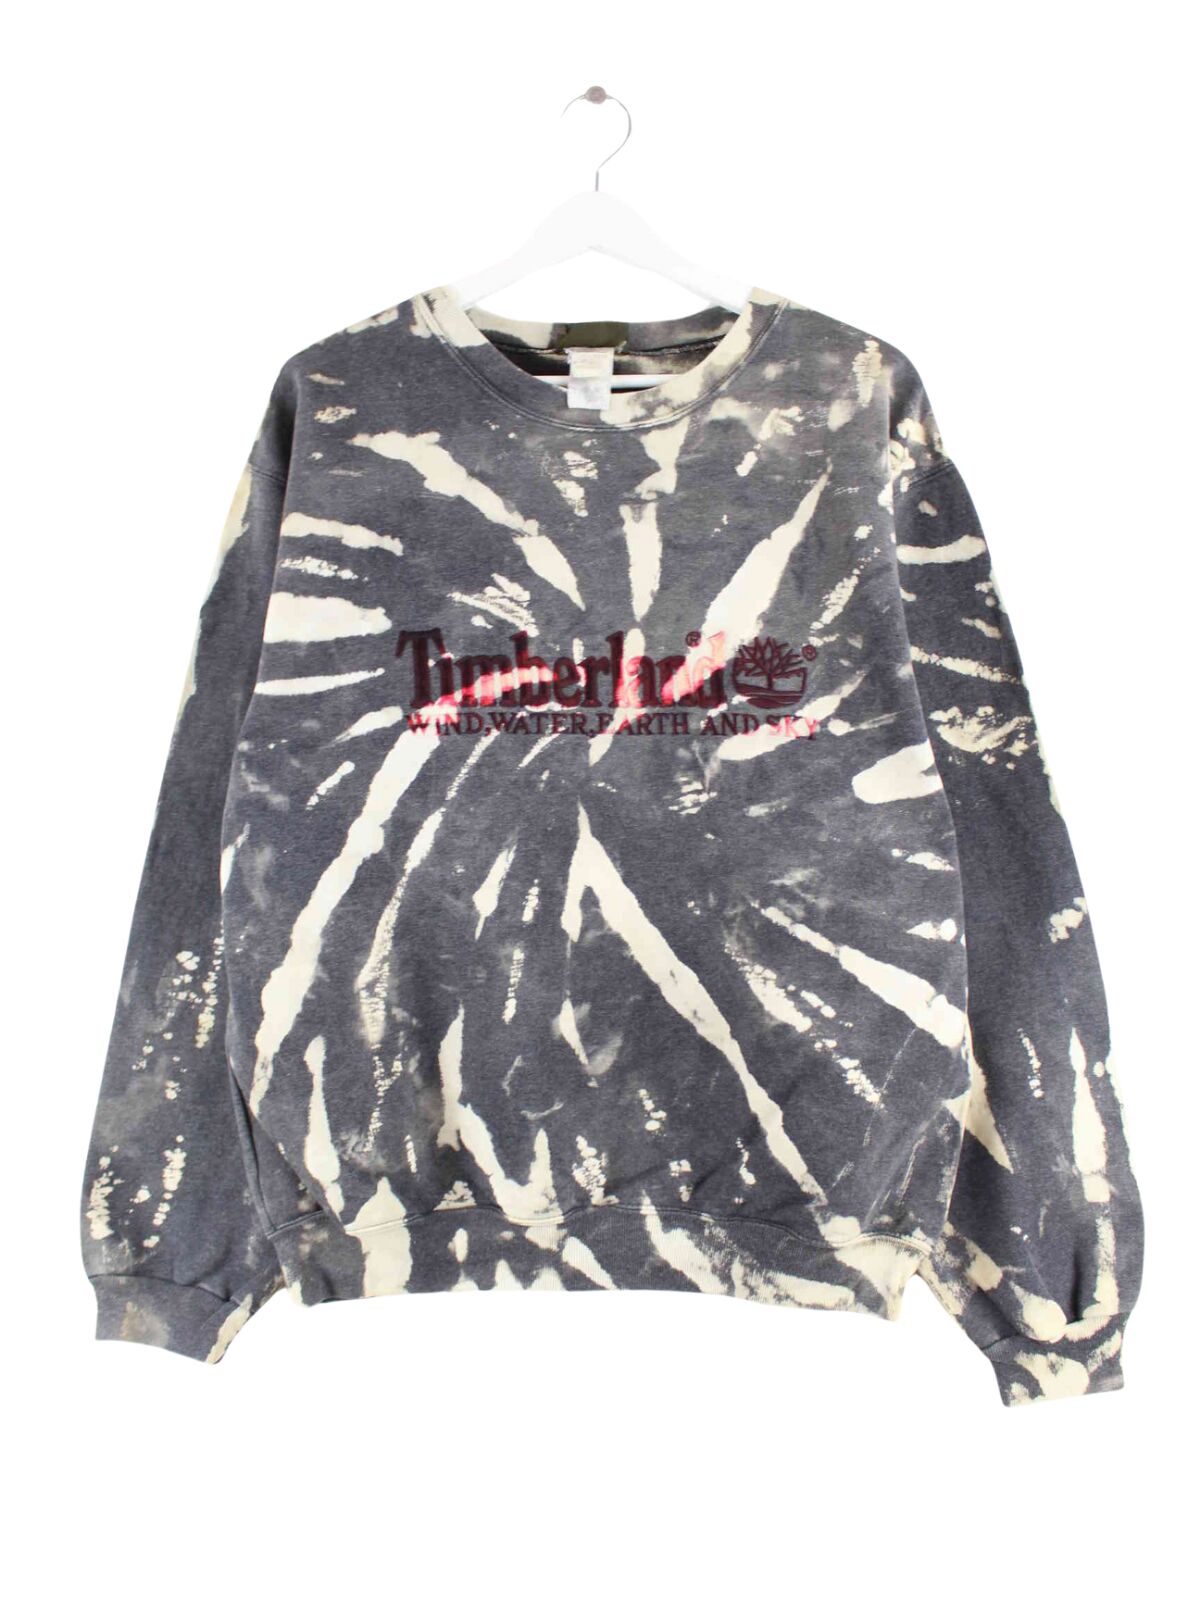 Timberland 90s Vintage Embroidered Tie Dye Sweater Grau M (front image)